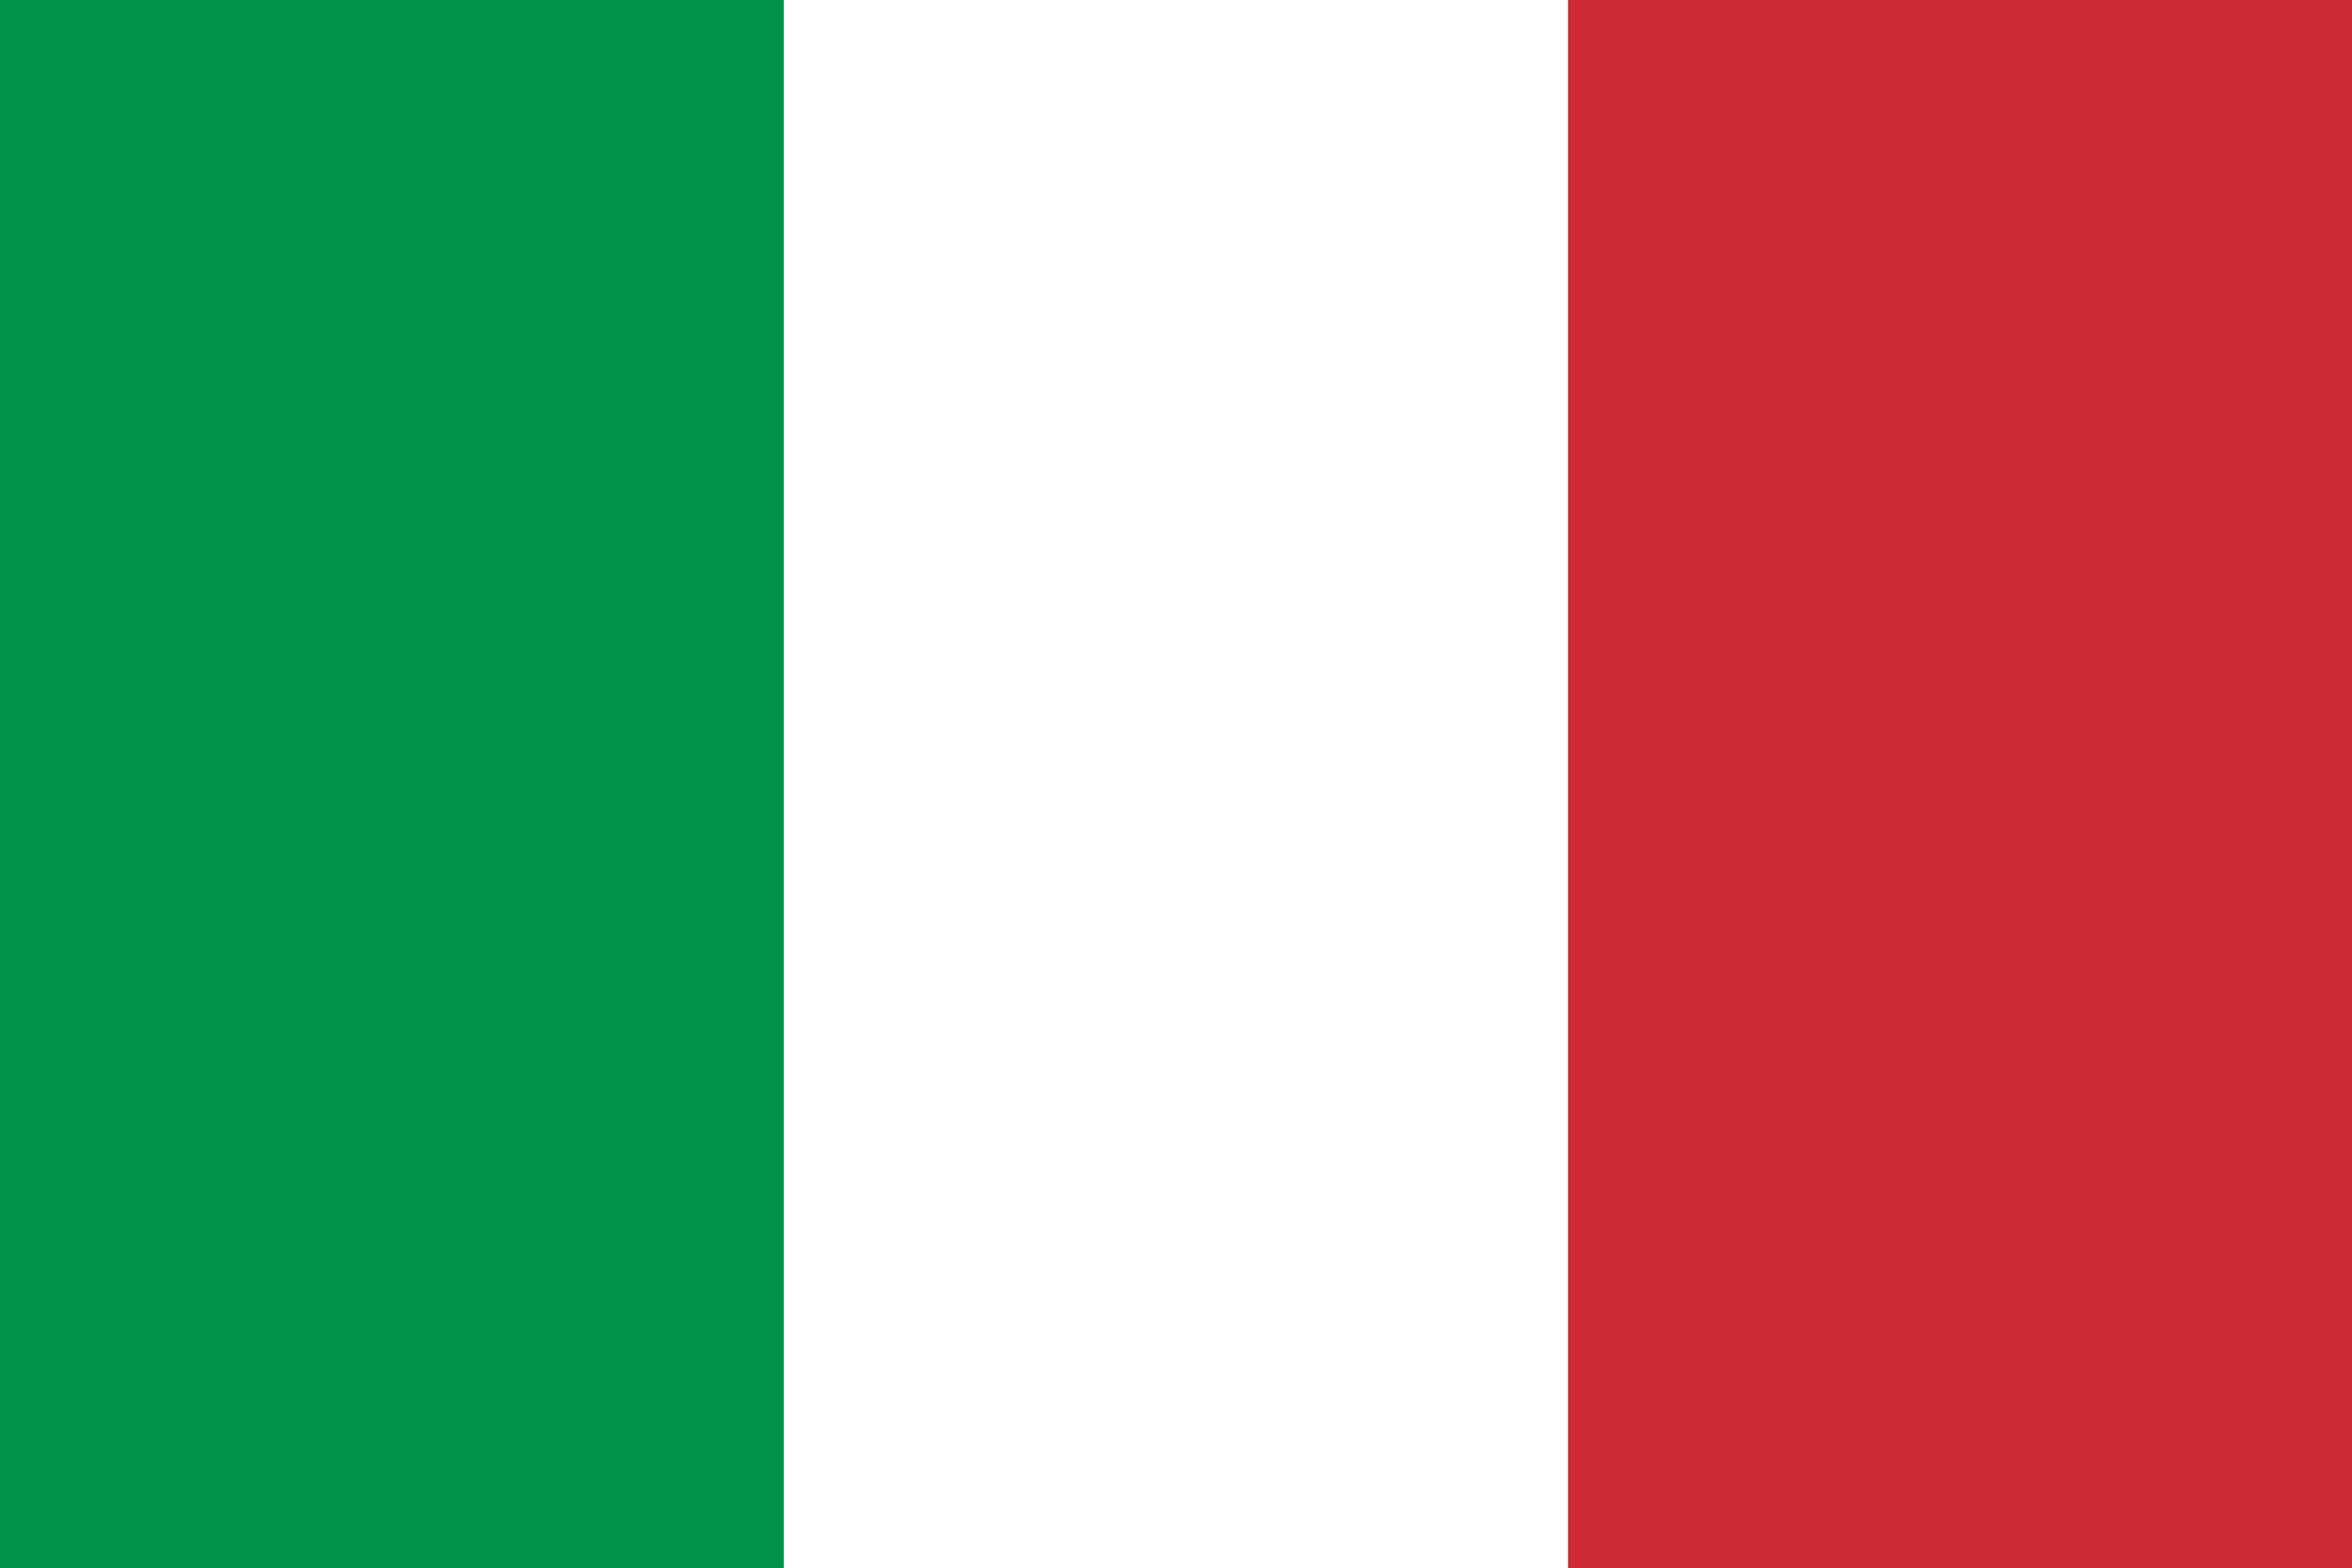 File:Flag of Italy.svg - Wikipedia